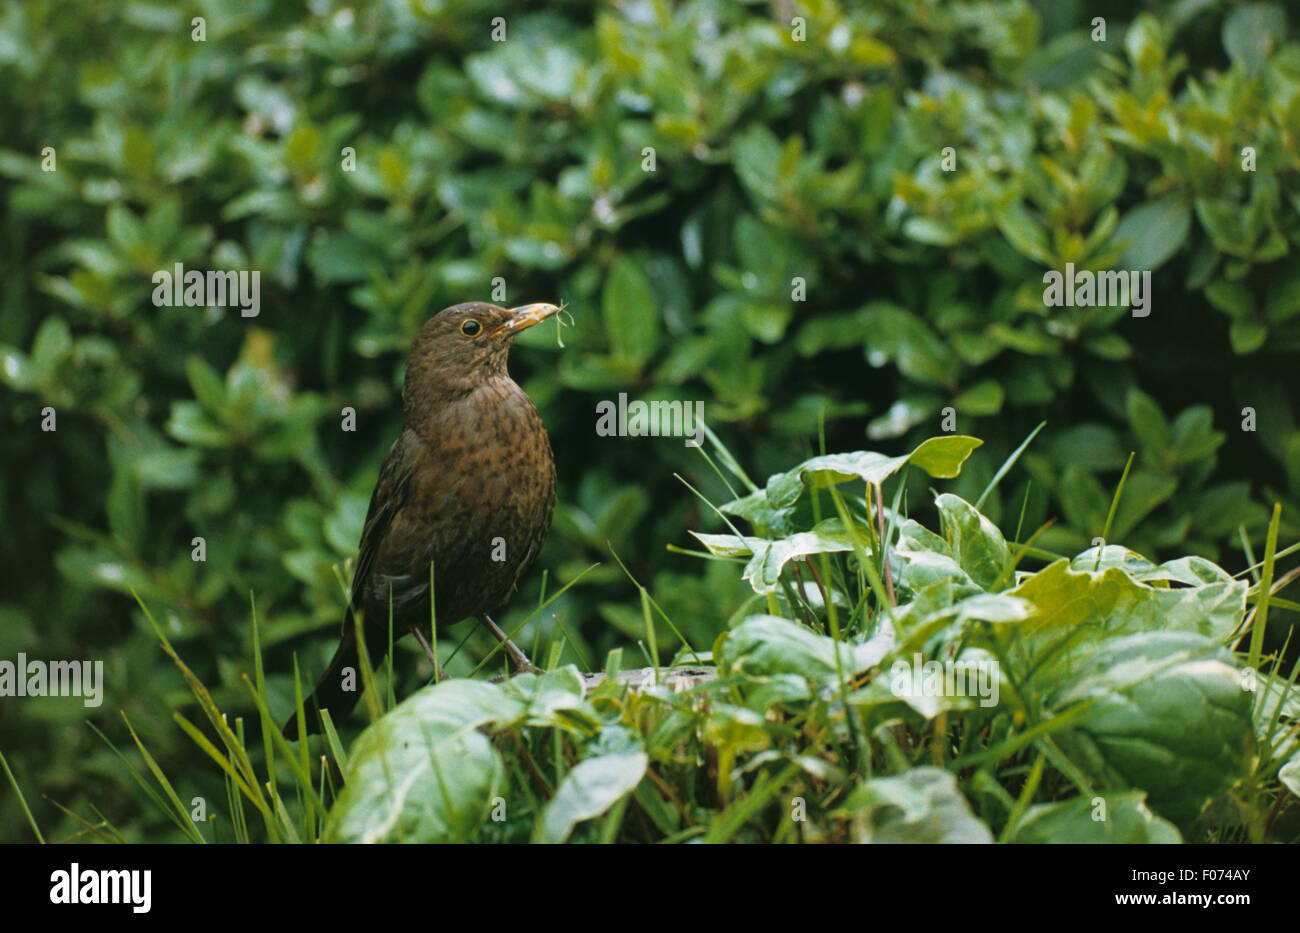 Blackbird taken from front looking right perched in long grass on ivy covered log Stock Photo